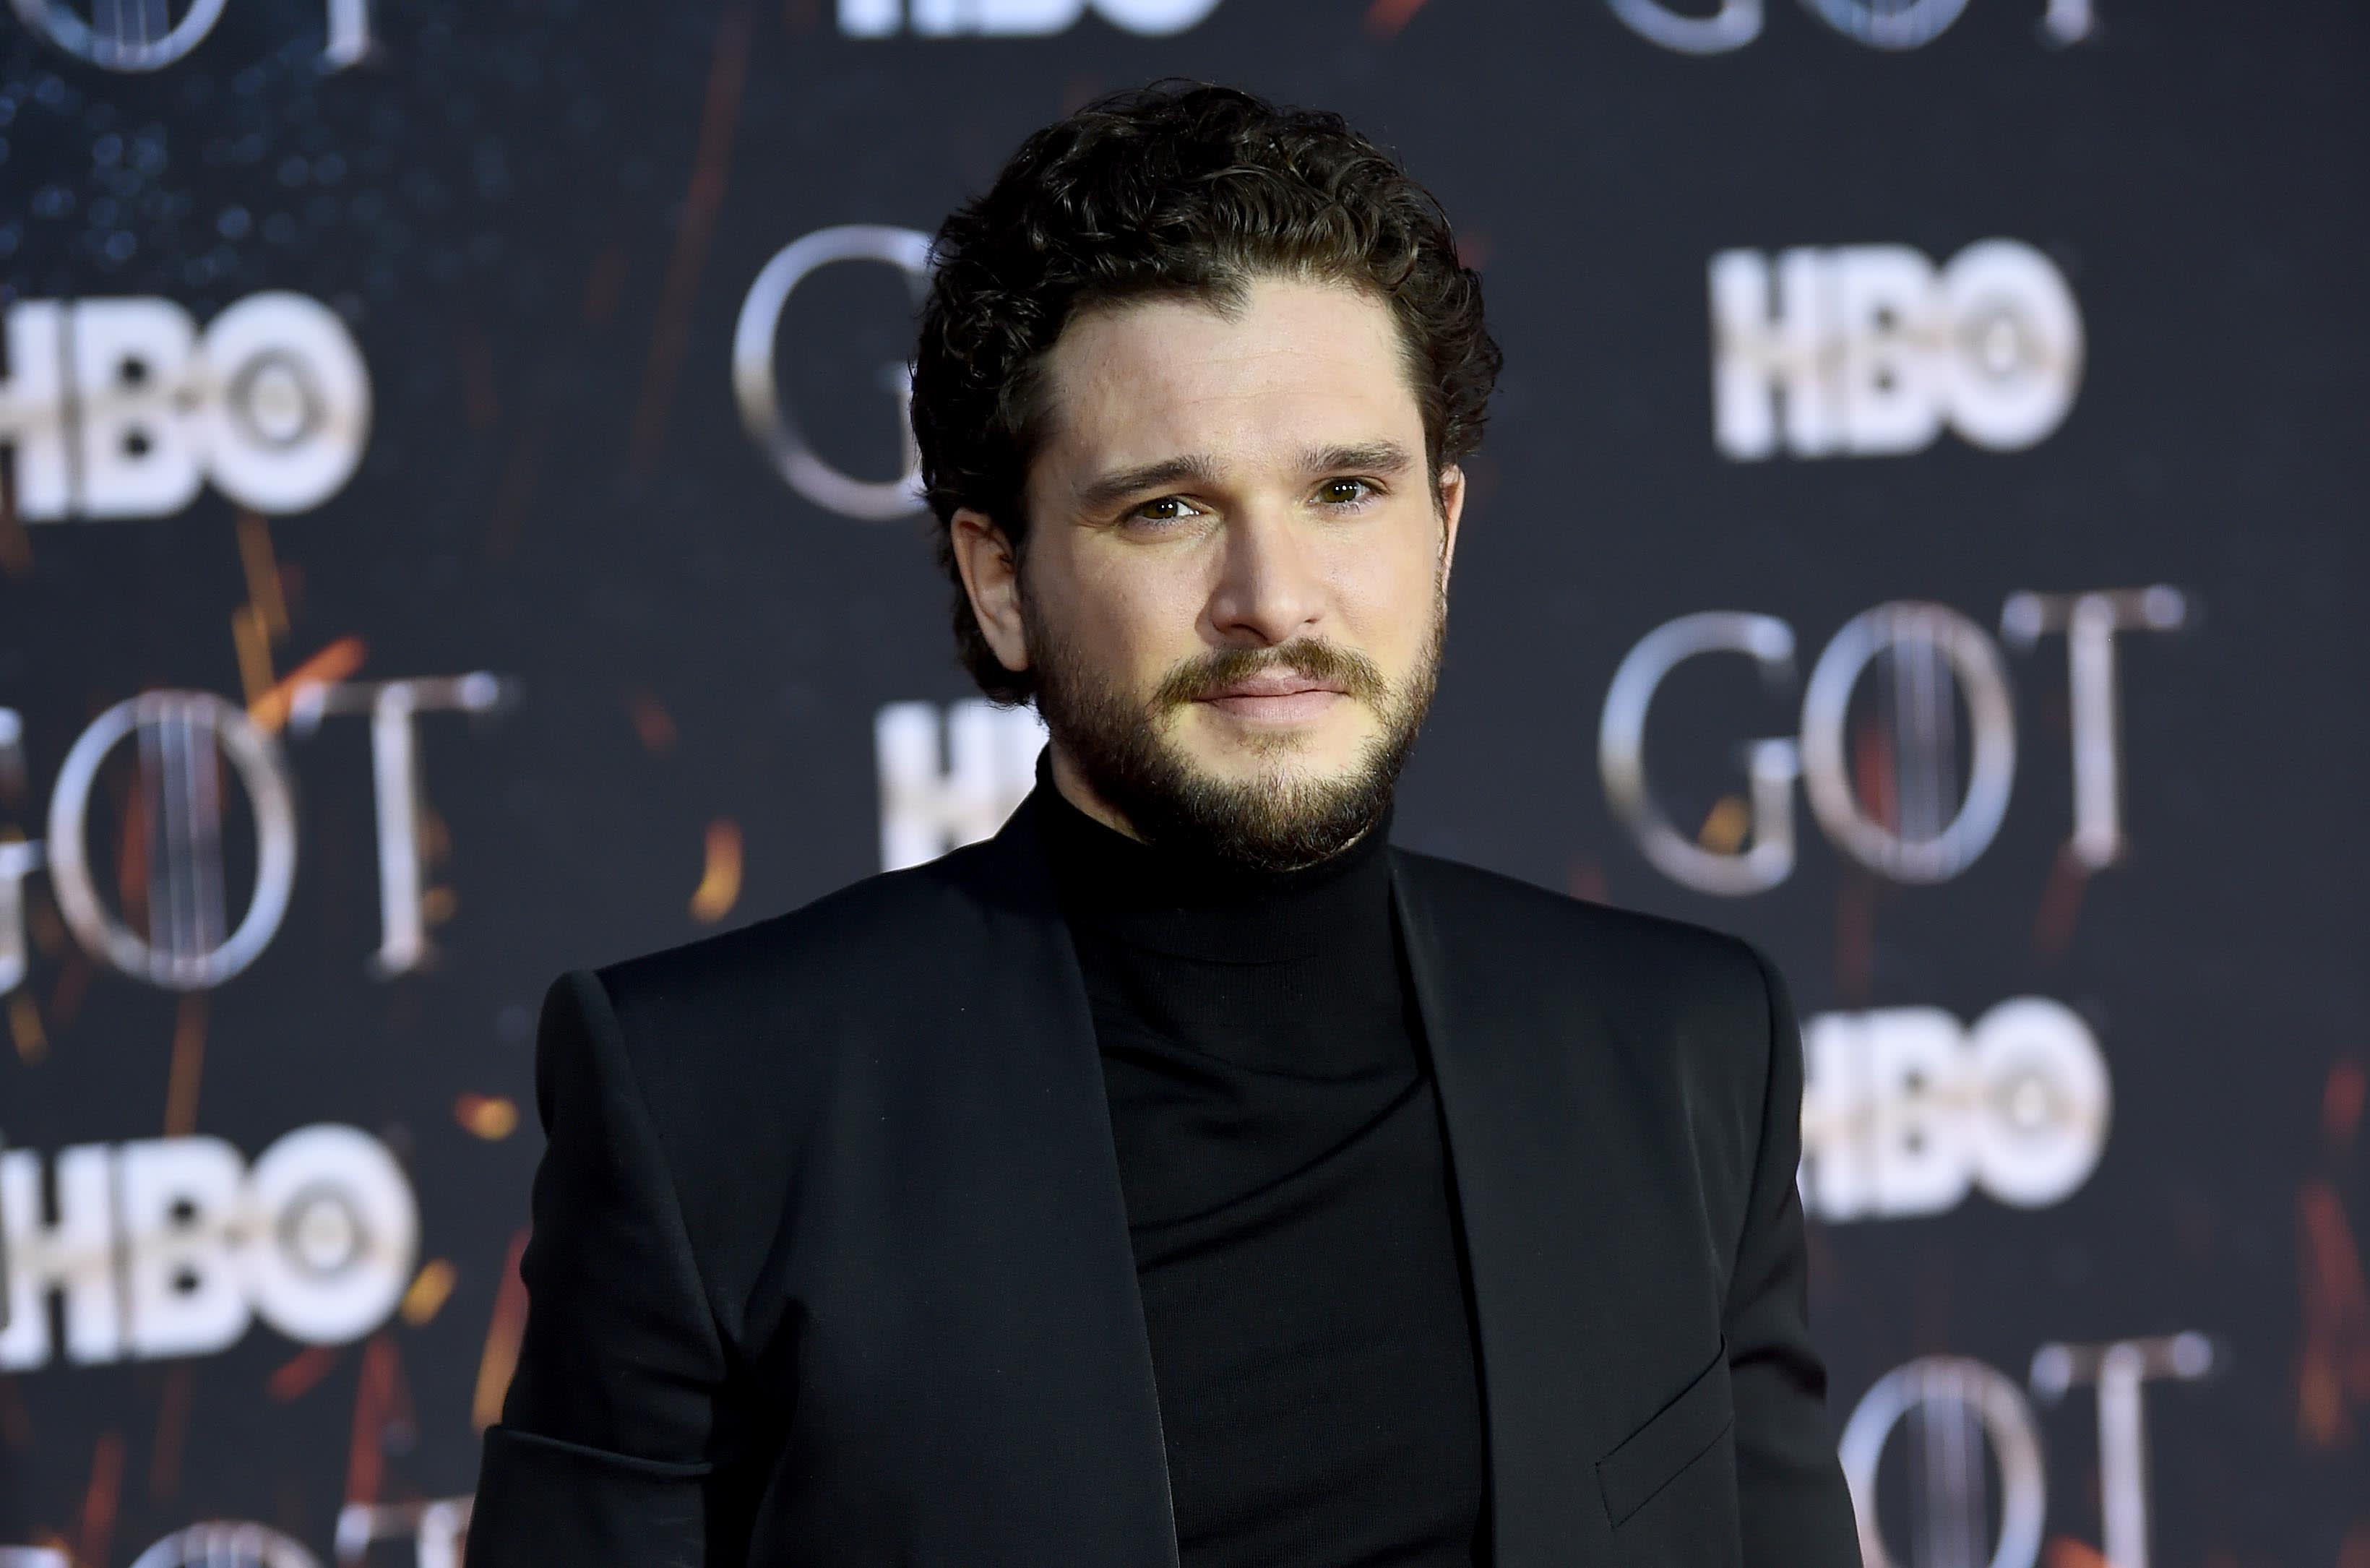 How much it costs to produce an episode of 'Game of Thrones